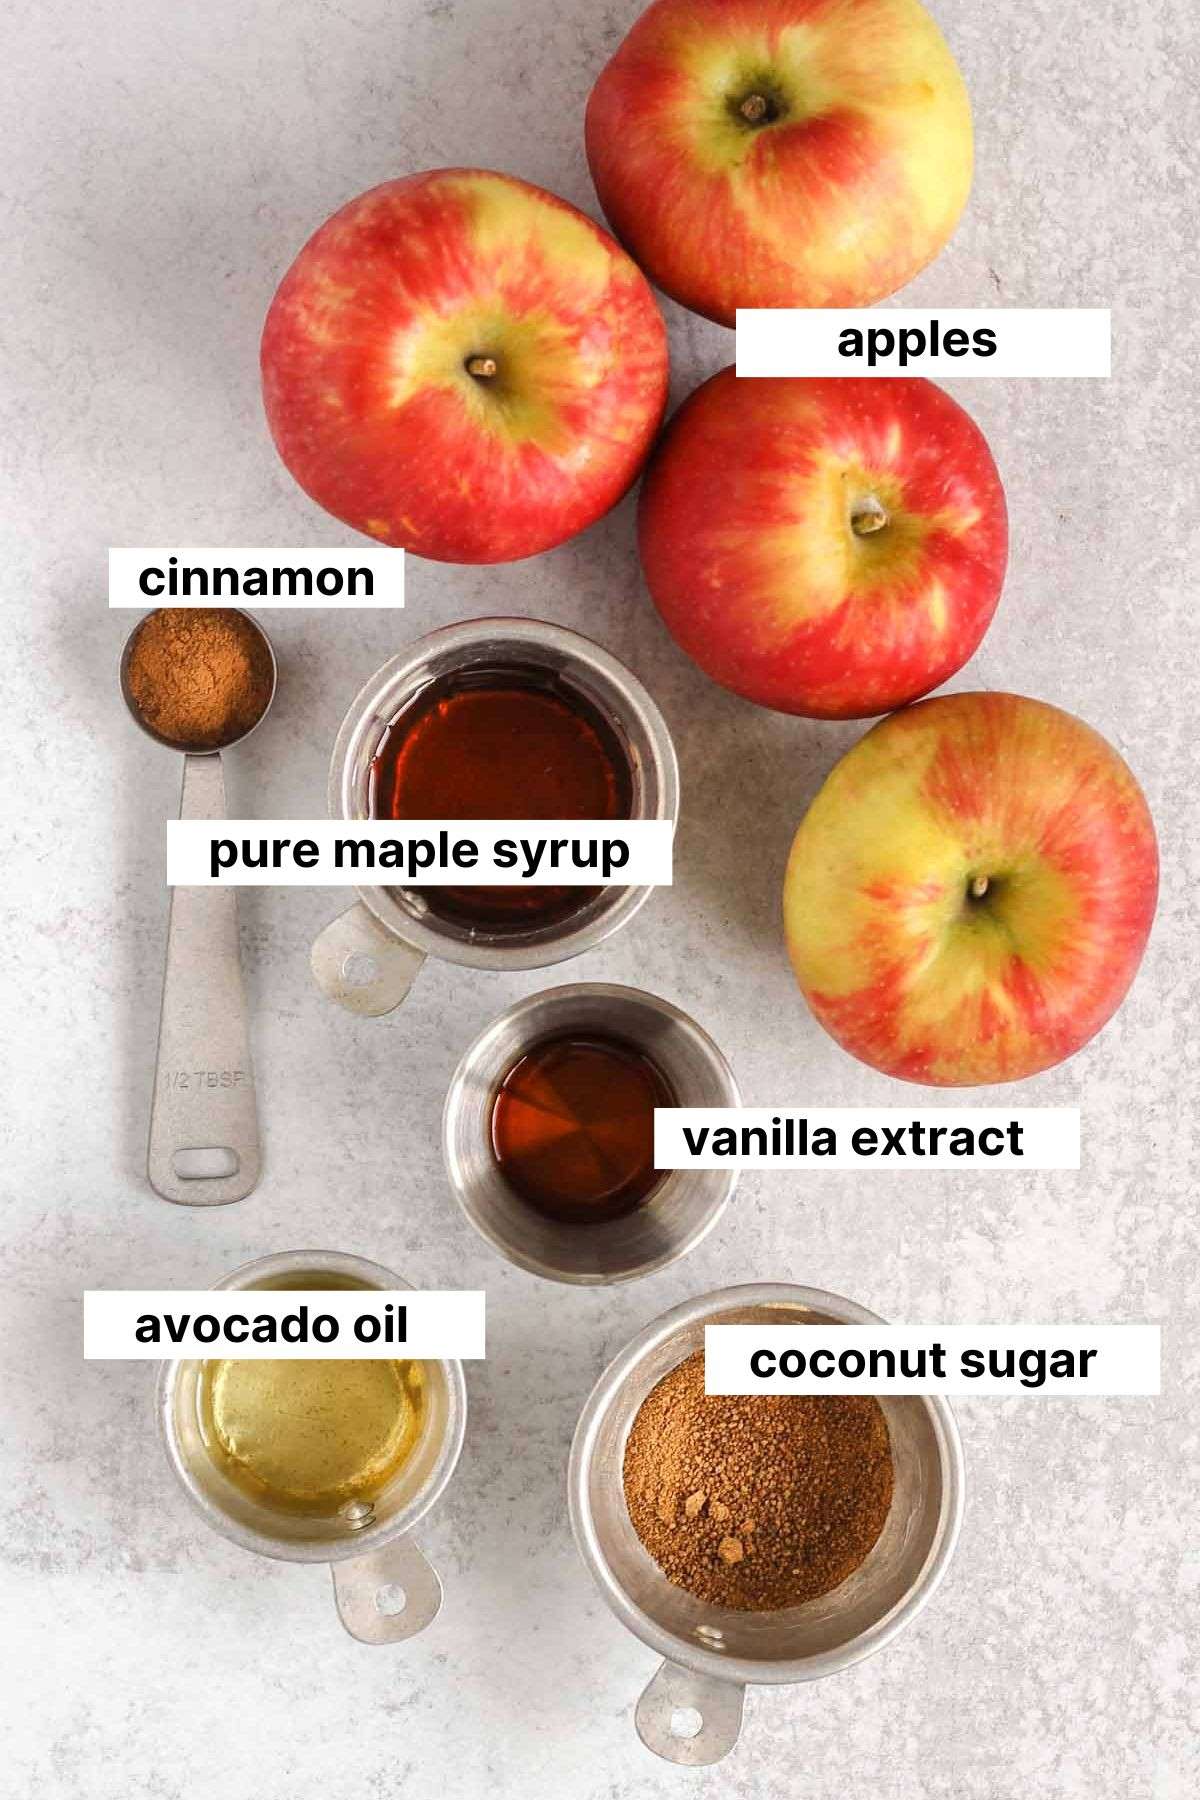 Labeled ingredients for air fryer apples.